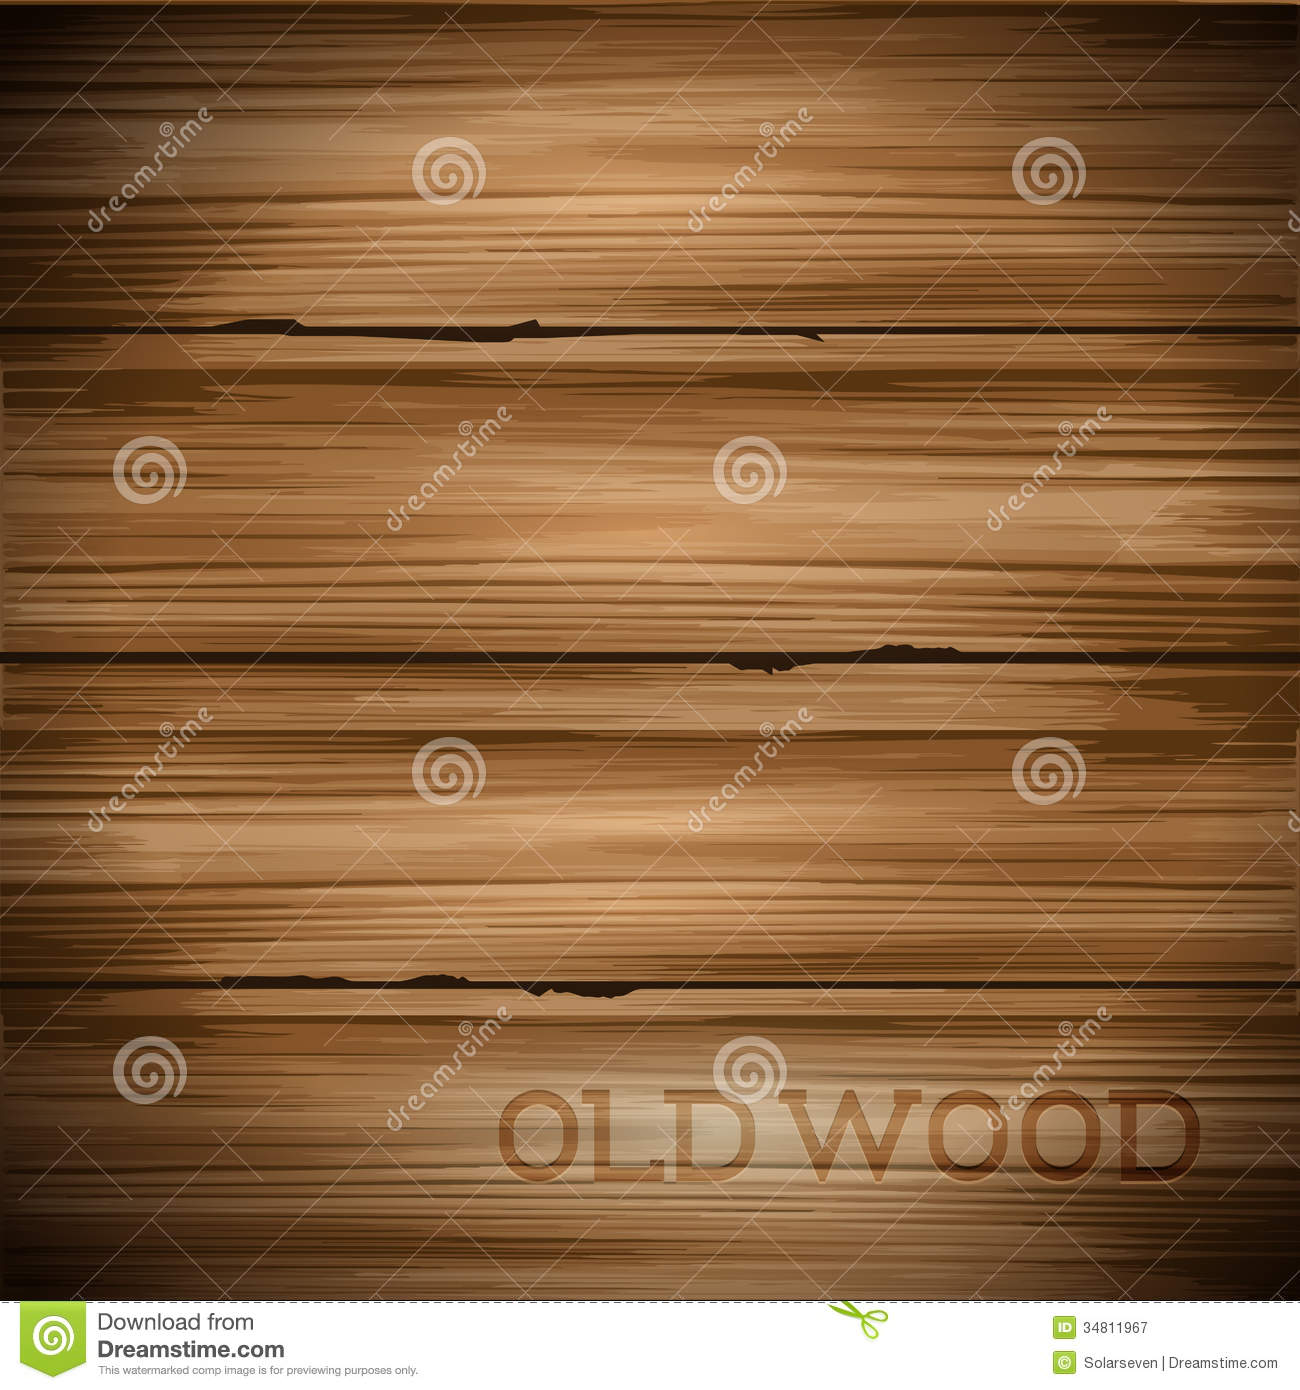 Old Wood Background Vector Free